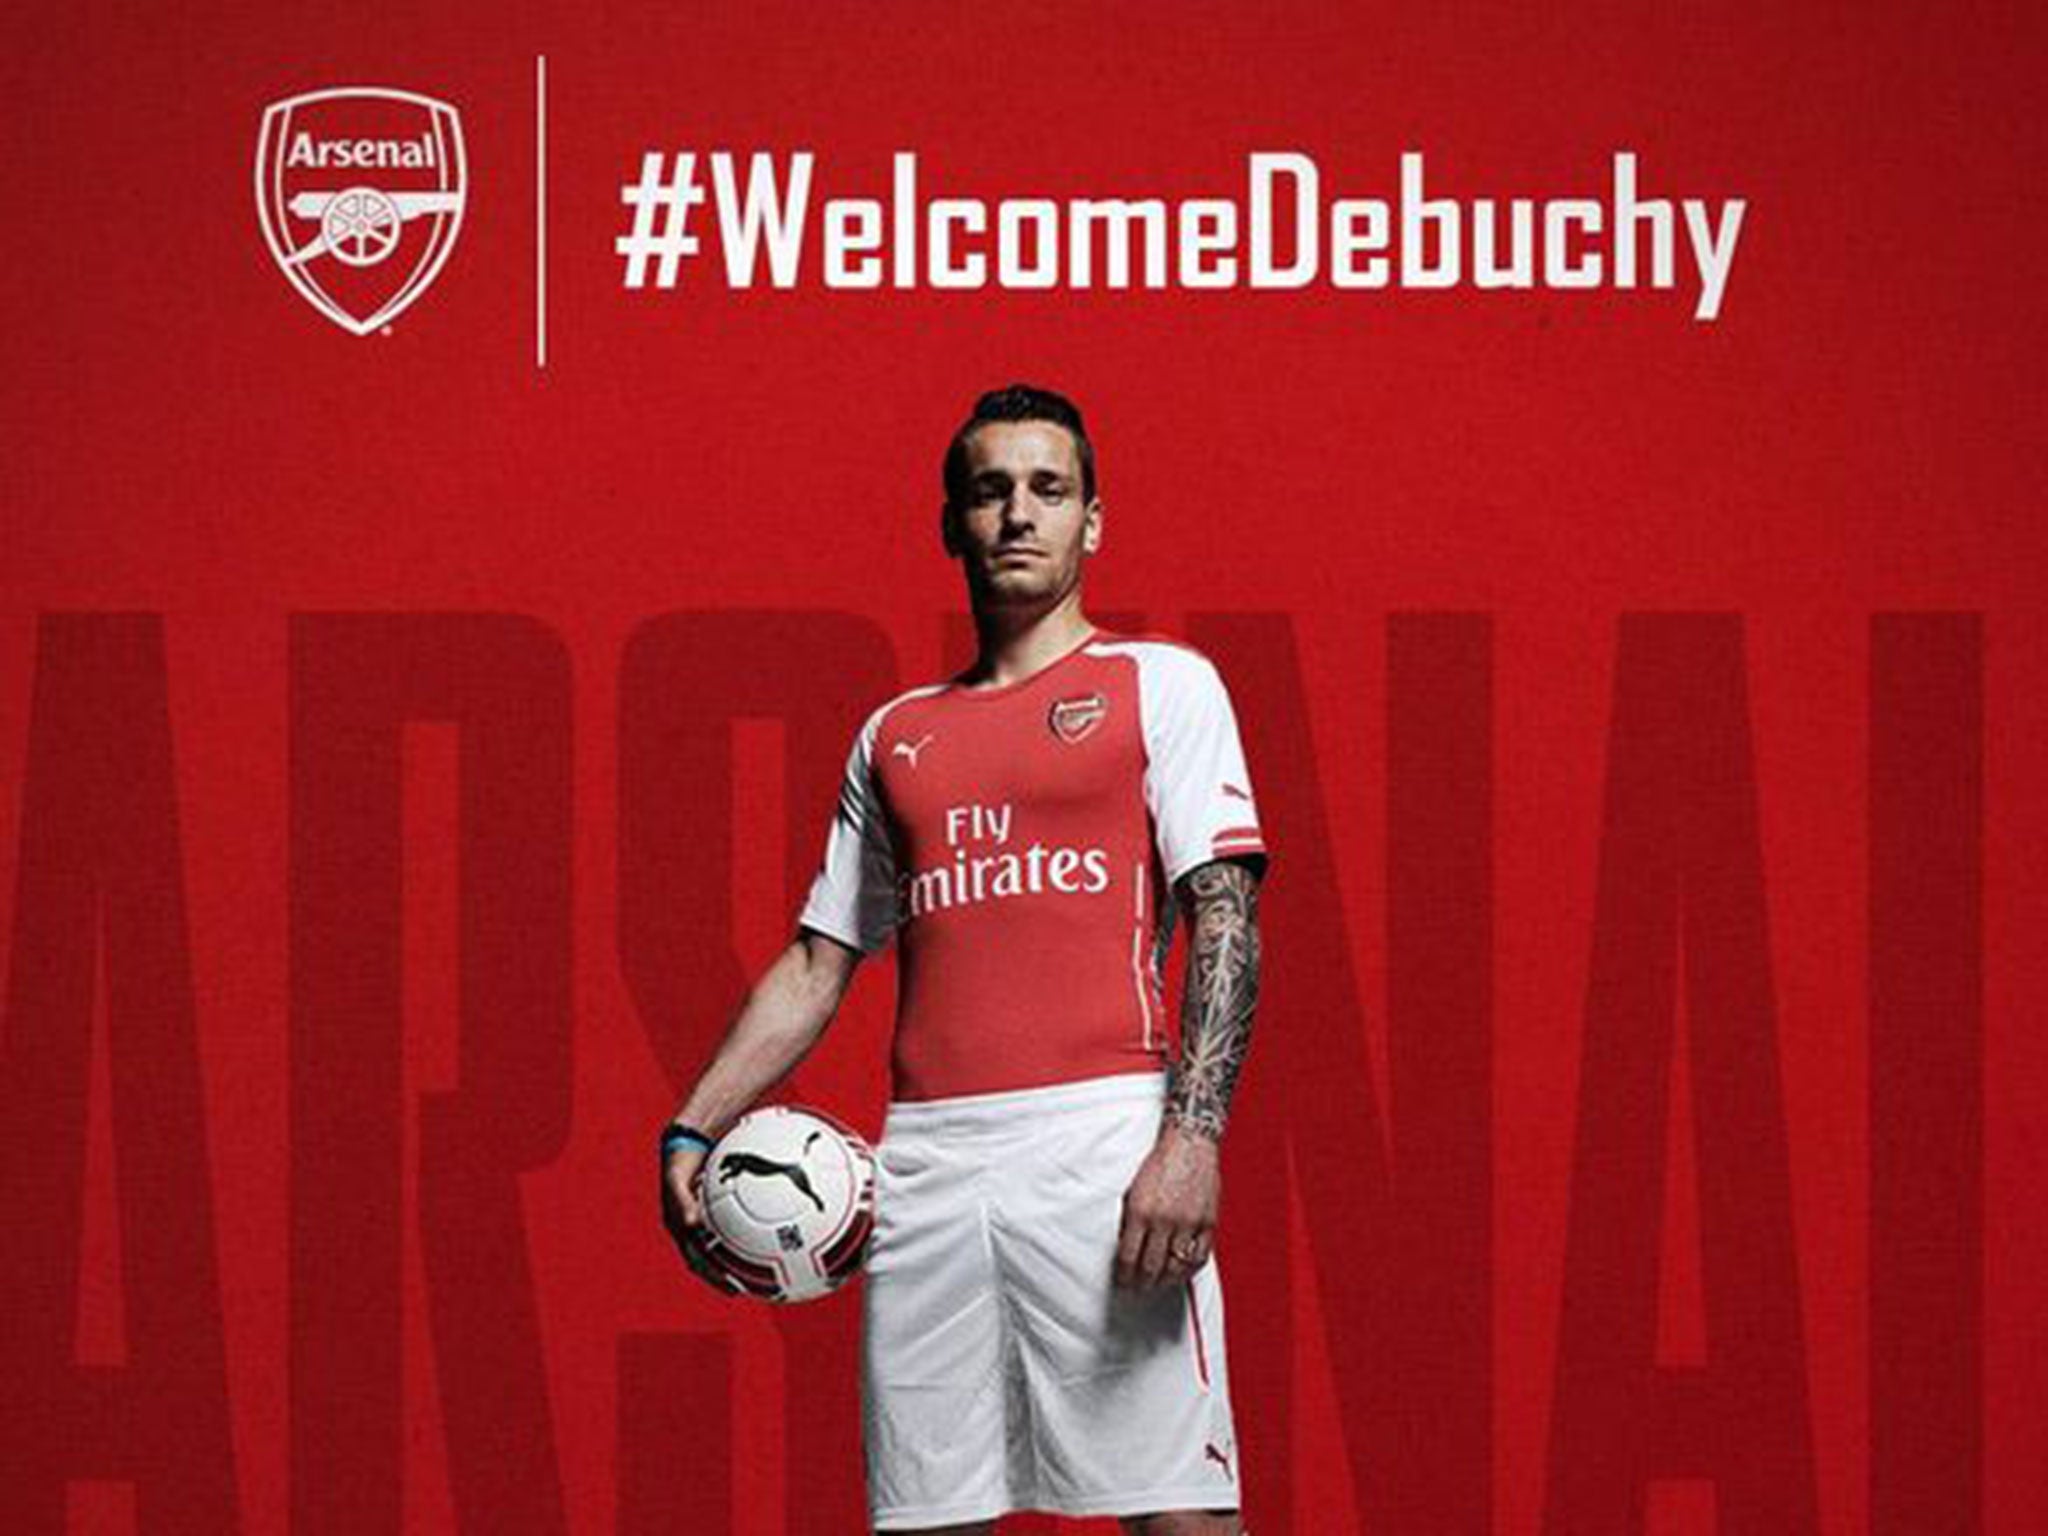 Mathieu Debuchy has signed for Arsenal from Newcastle